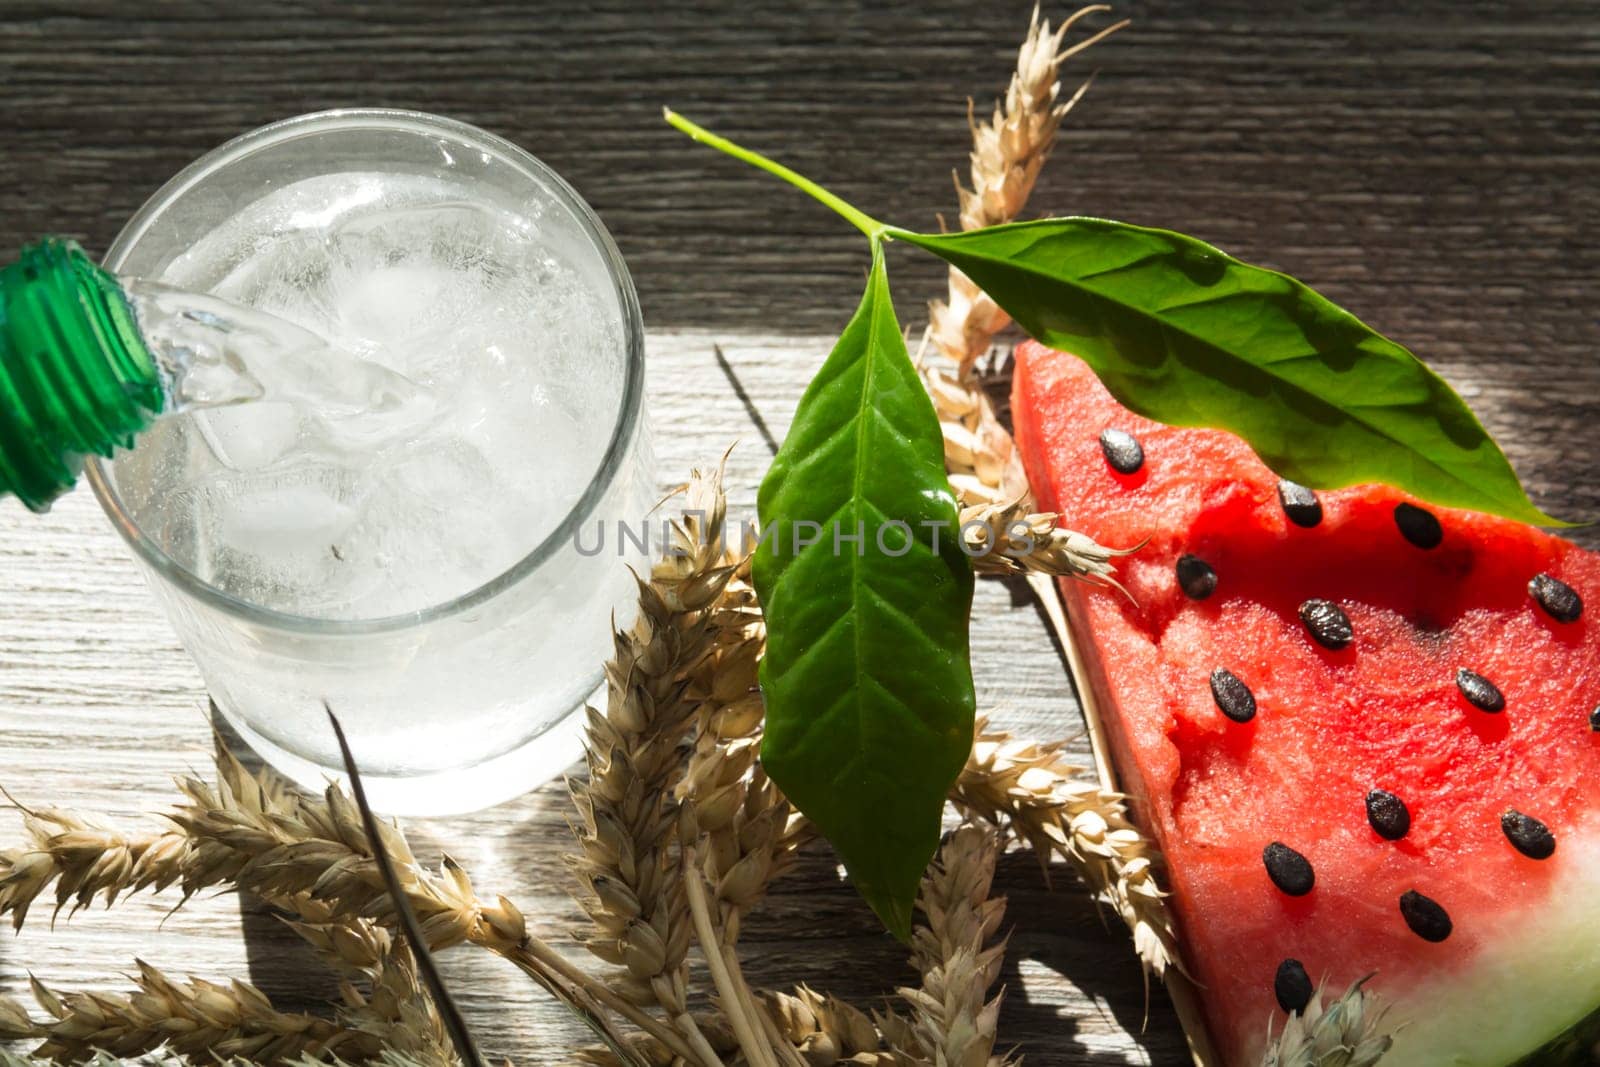 A triangular piece of sweet watermelon on an ice cream shelf, a cold drink with ice and ripe wheat ears on a wooden surface.